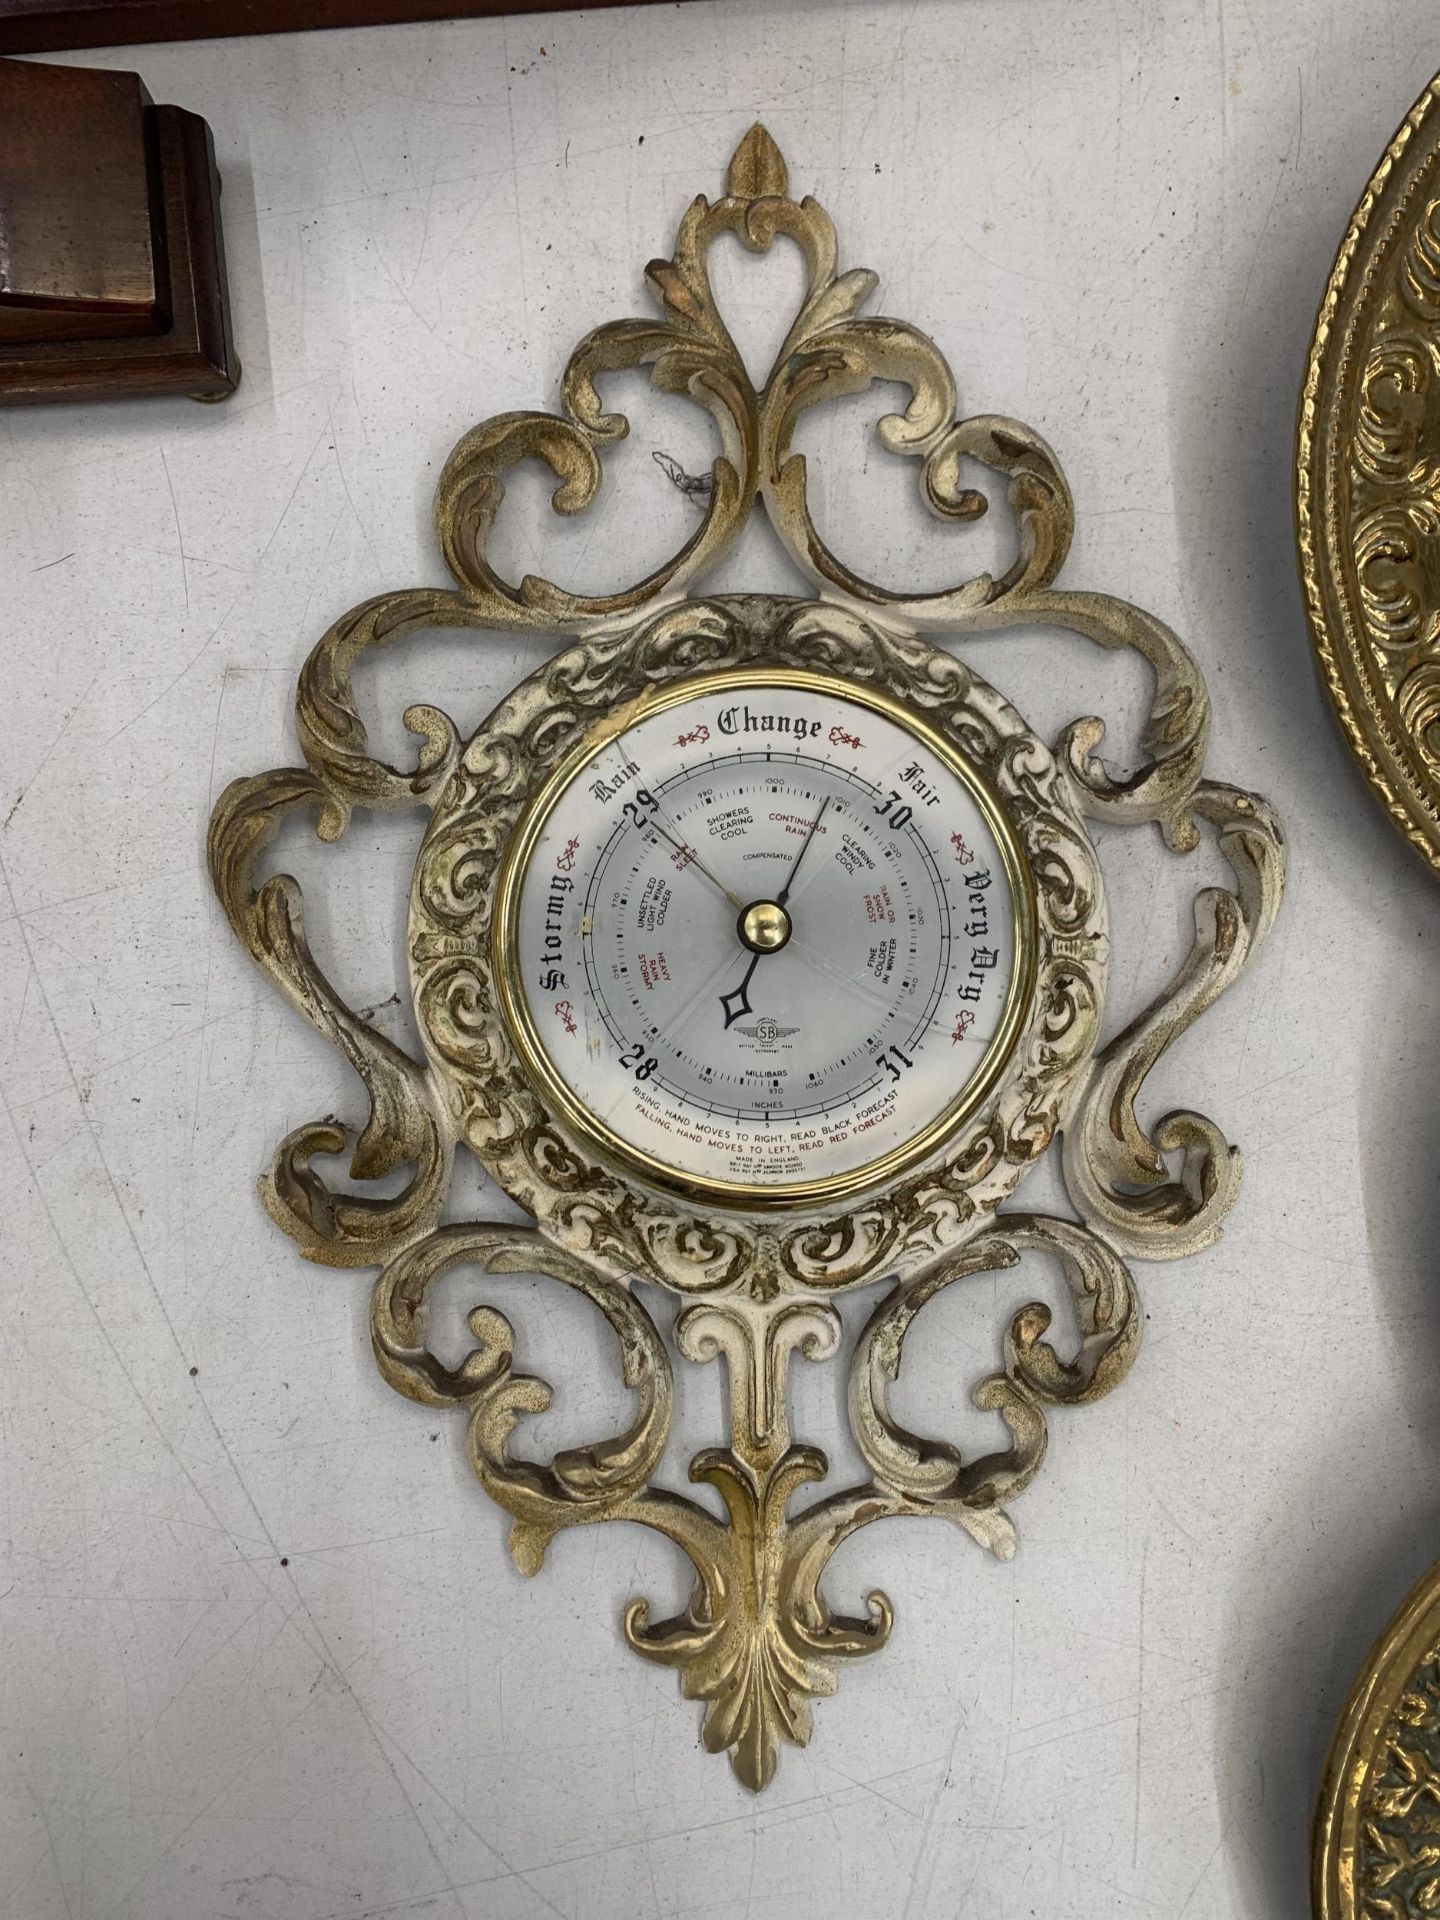 AN ORNATE STYLE RESIN BAROMETER AND A WALL CLOCK - Image 2 of 3